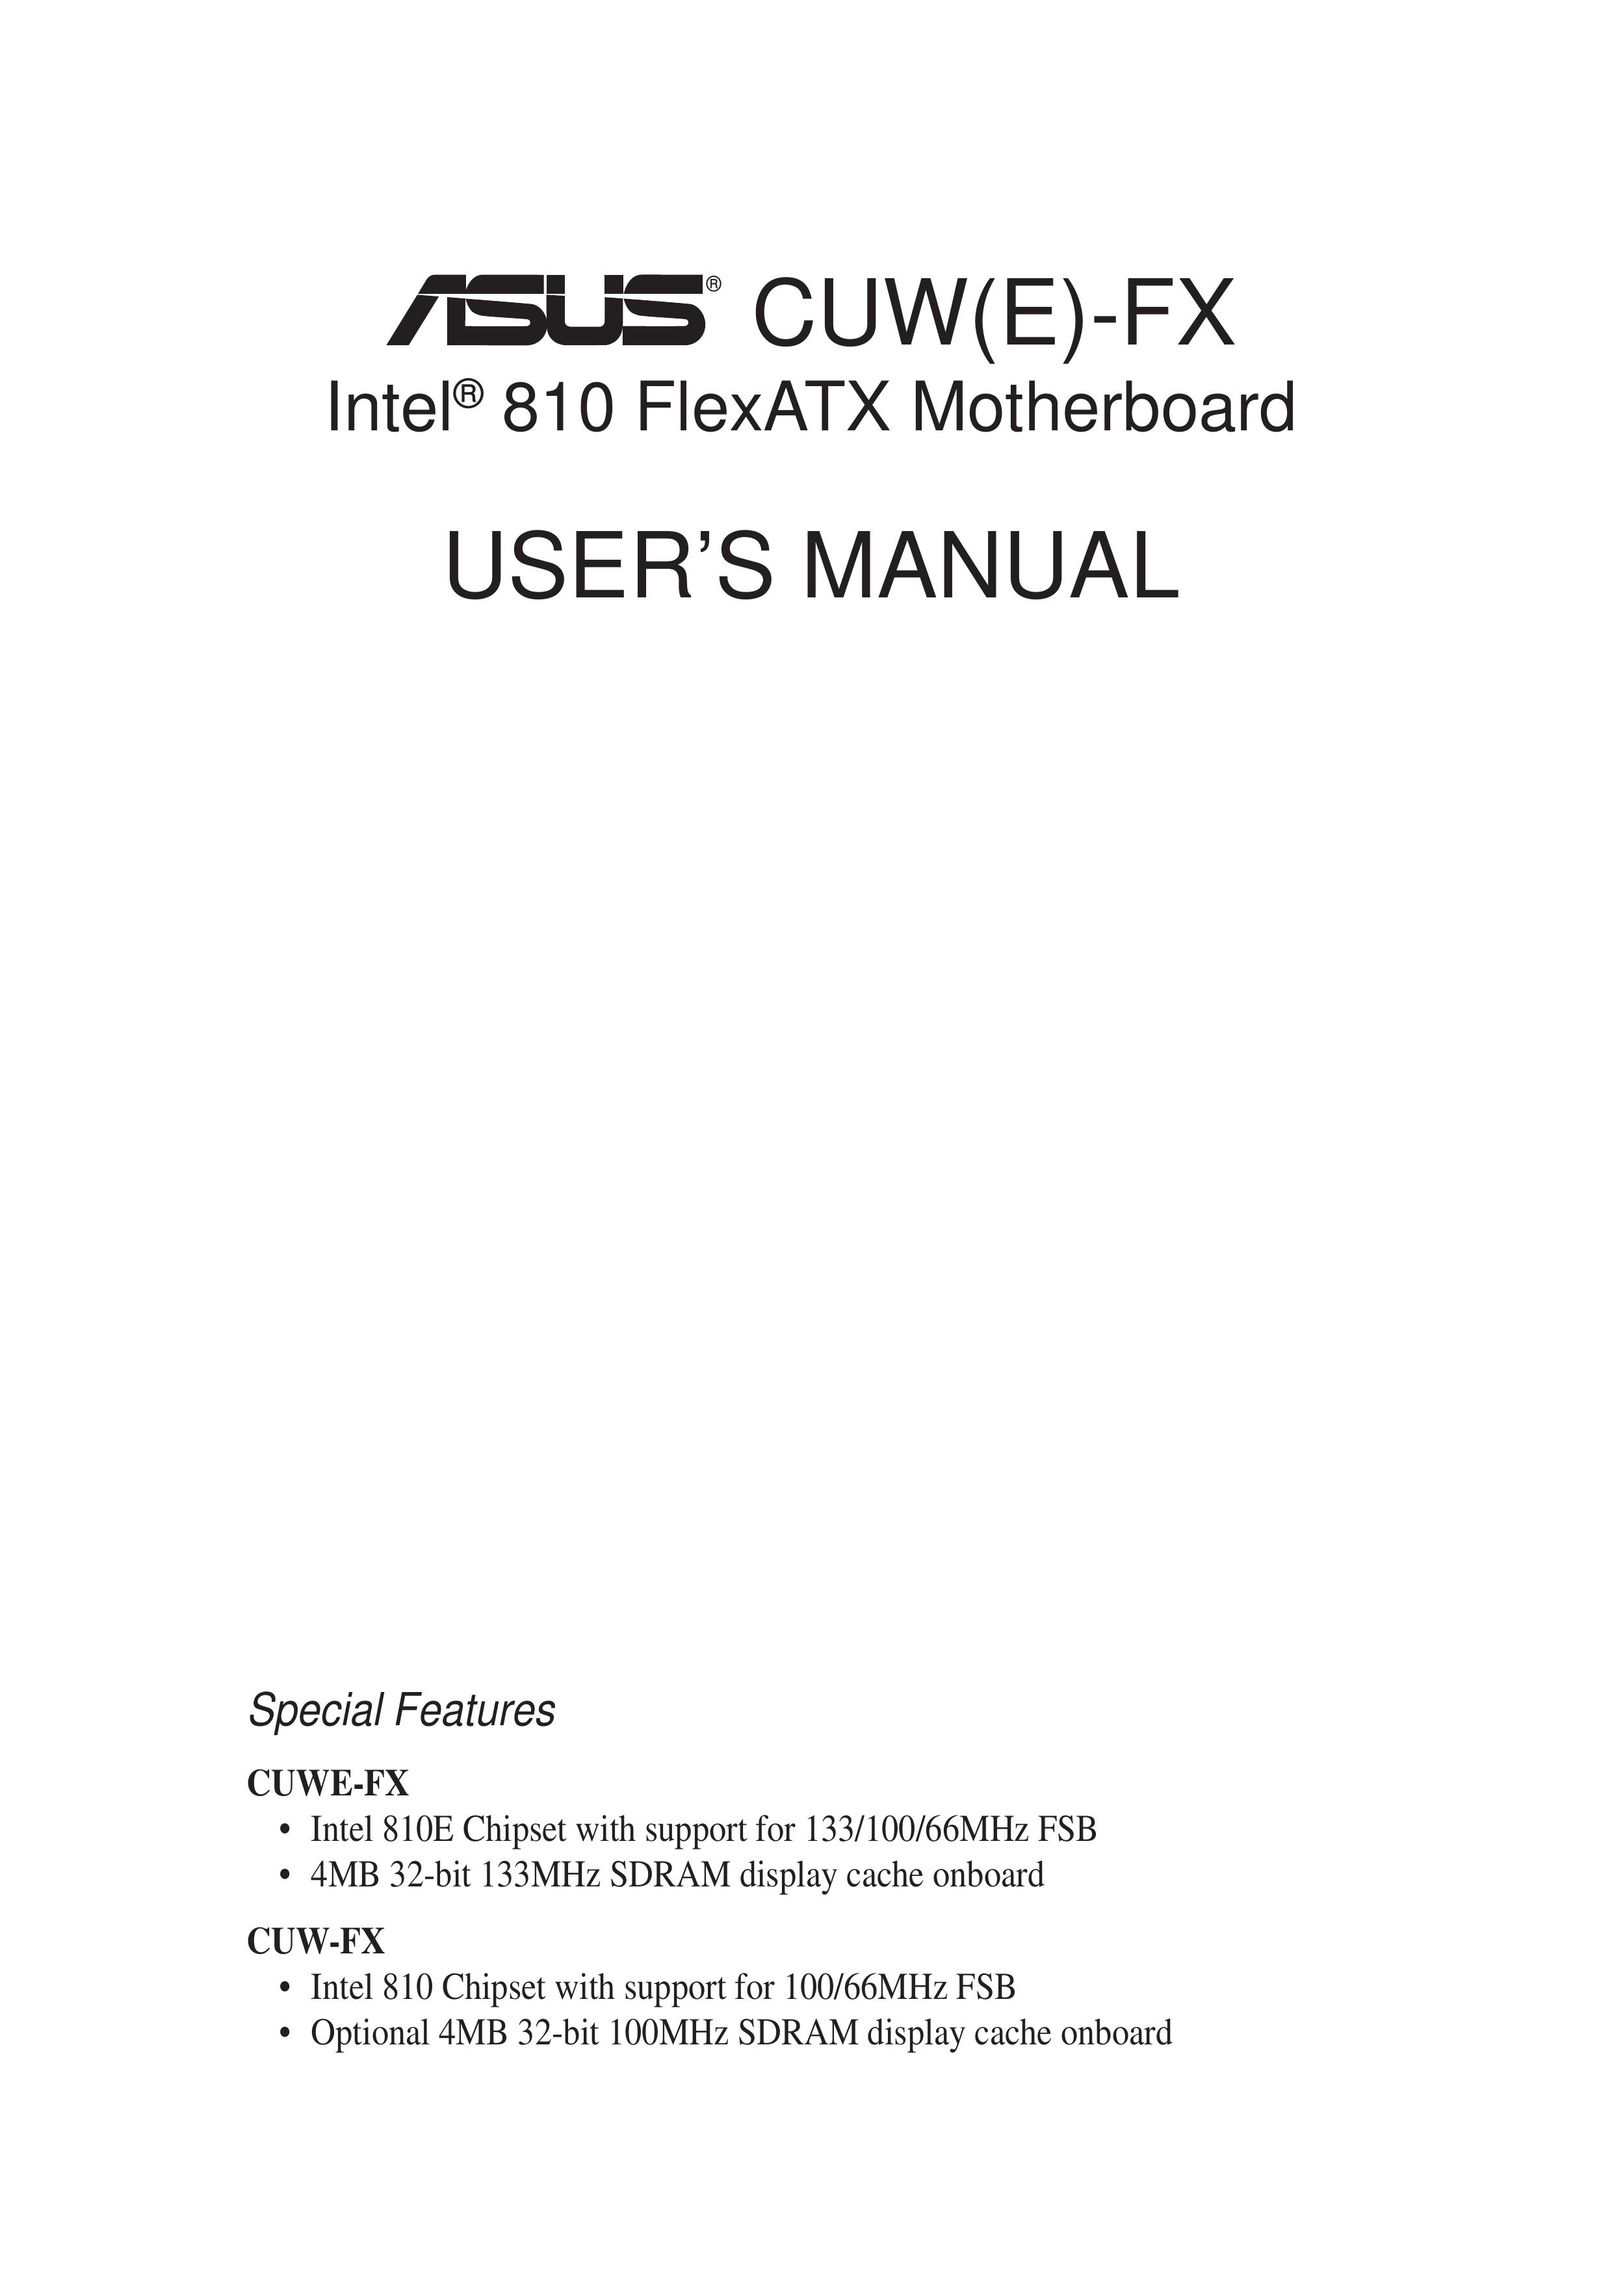 Asus CUW(E)-FX Network Router User Manual